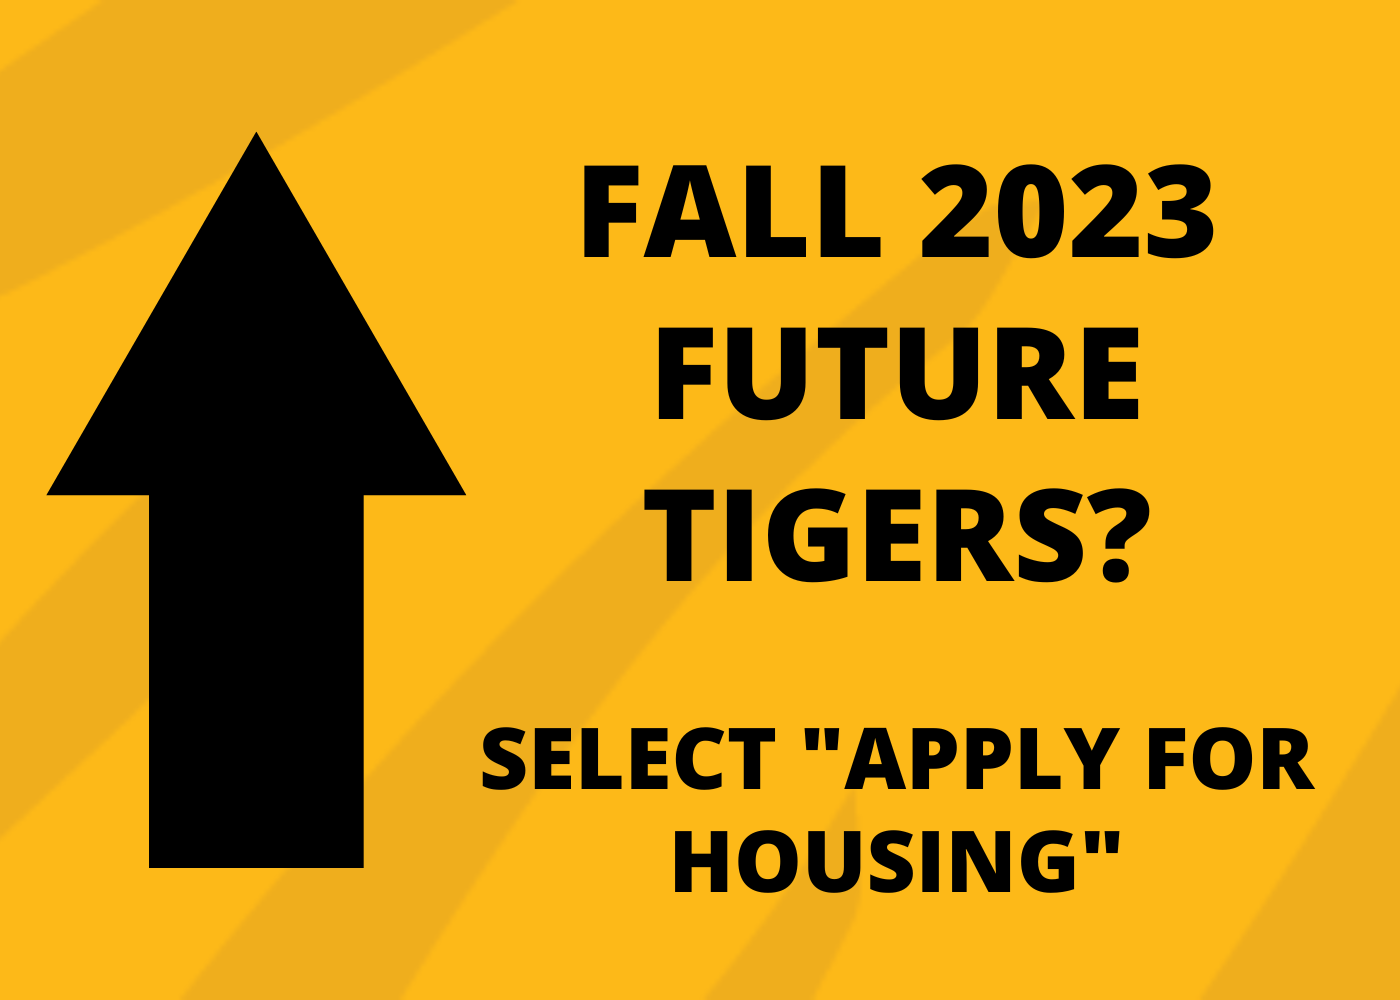 Fall 2023 Future Tigers? Select "Apply for Housing" above